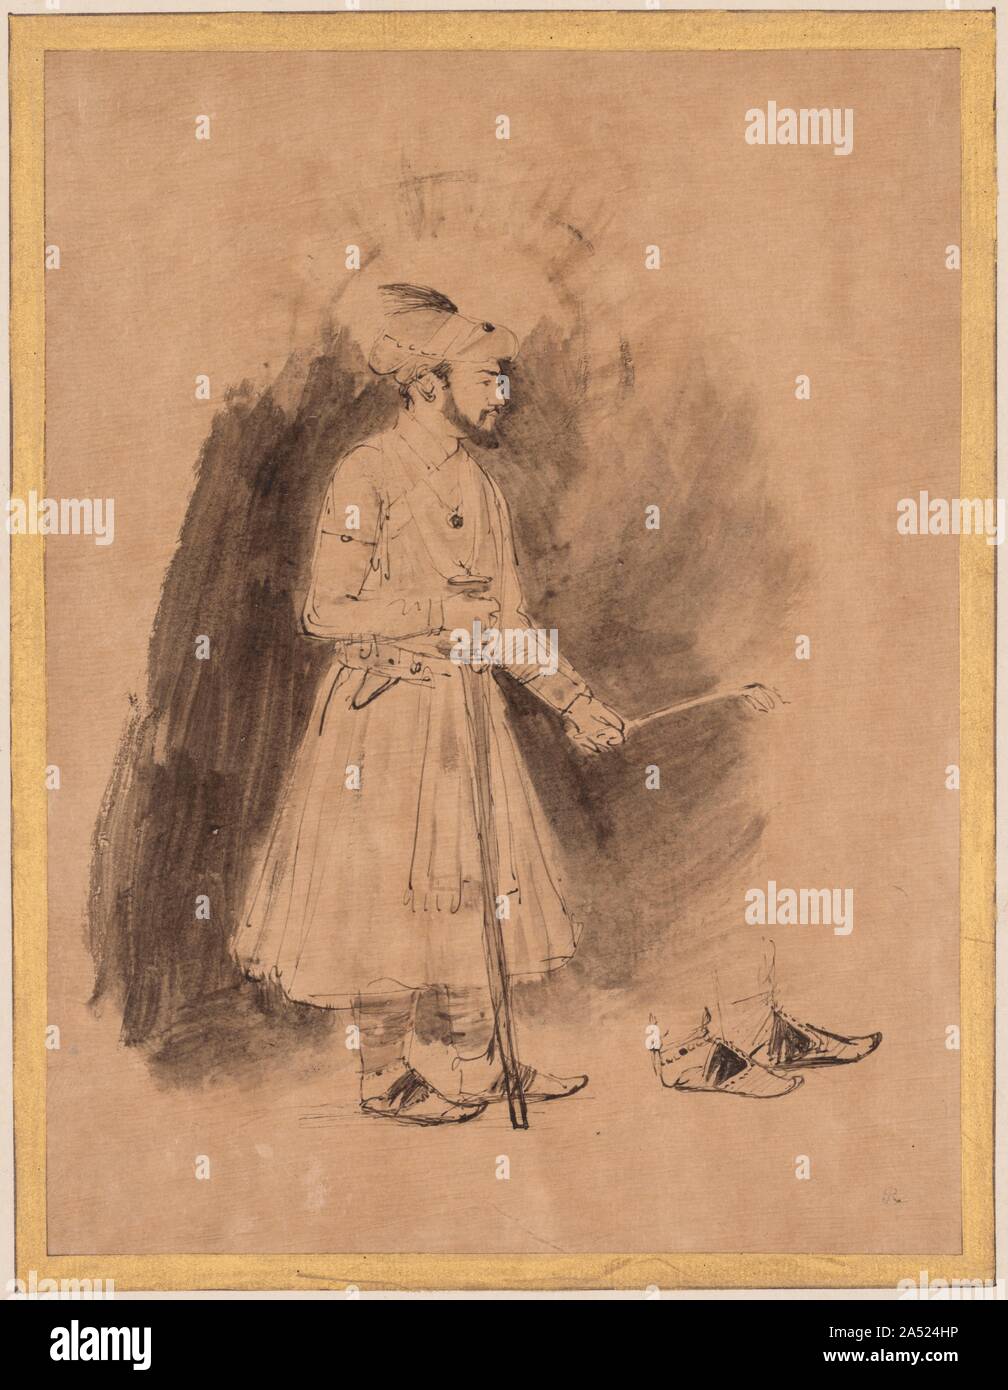 Shah Jahan, c. 1656-1661. Rembrandt drew a number of copies after Indian miniature paintings, and he based this sheet on a contemporary work of the Mughal school showing the emperor Shah Jahan (ruled 1628-58). The technique of this work is especially interesting because the artist used a Japanese paper, whose surface absorbs the ink in a very different way from traditional Western papers. Stock Photo